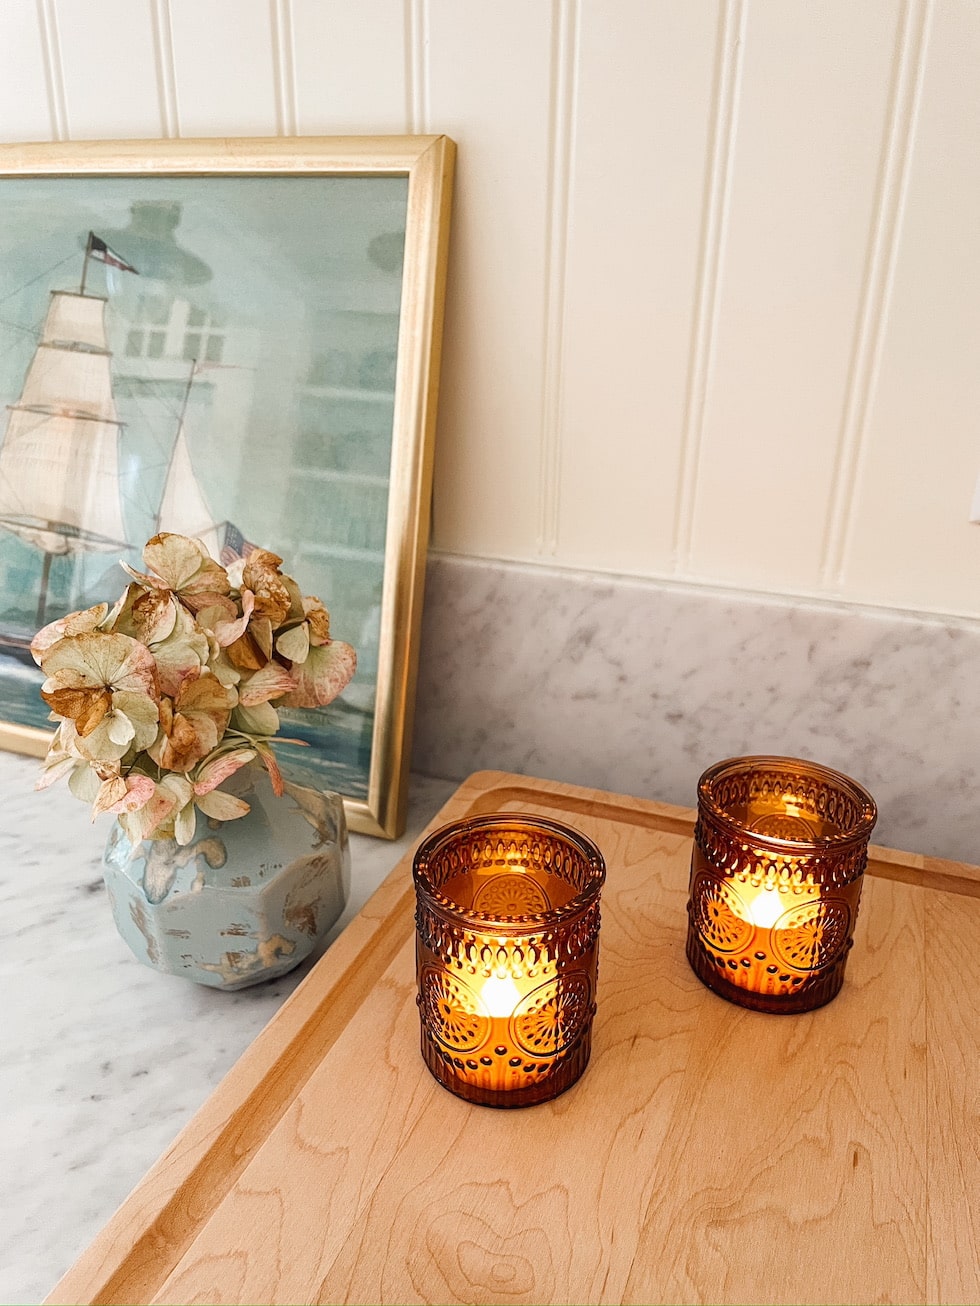 Candleholder Sources: A Round Up and Ideas for A Welcoming Home